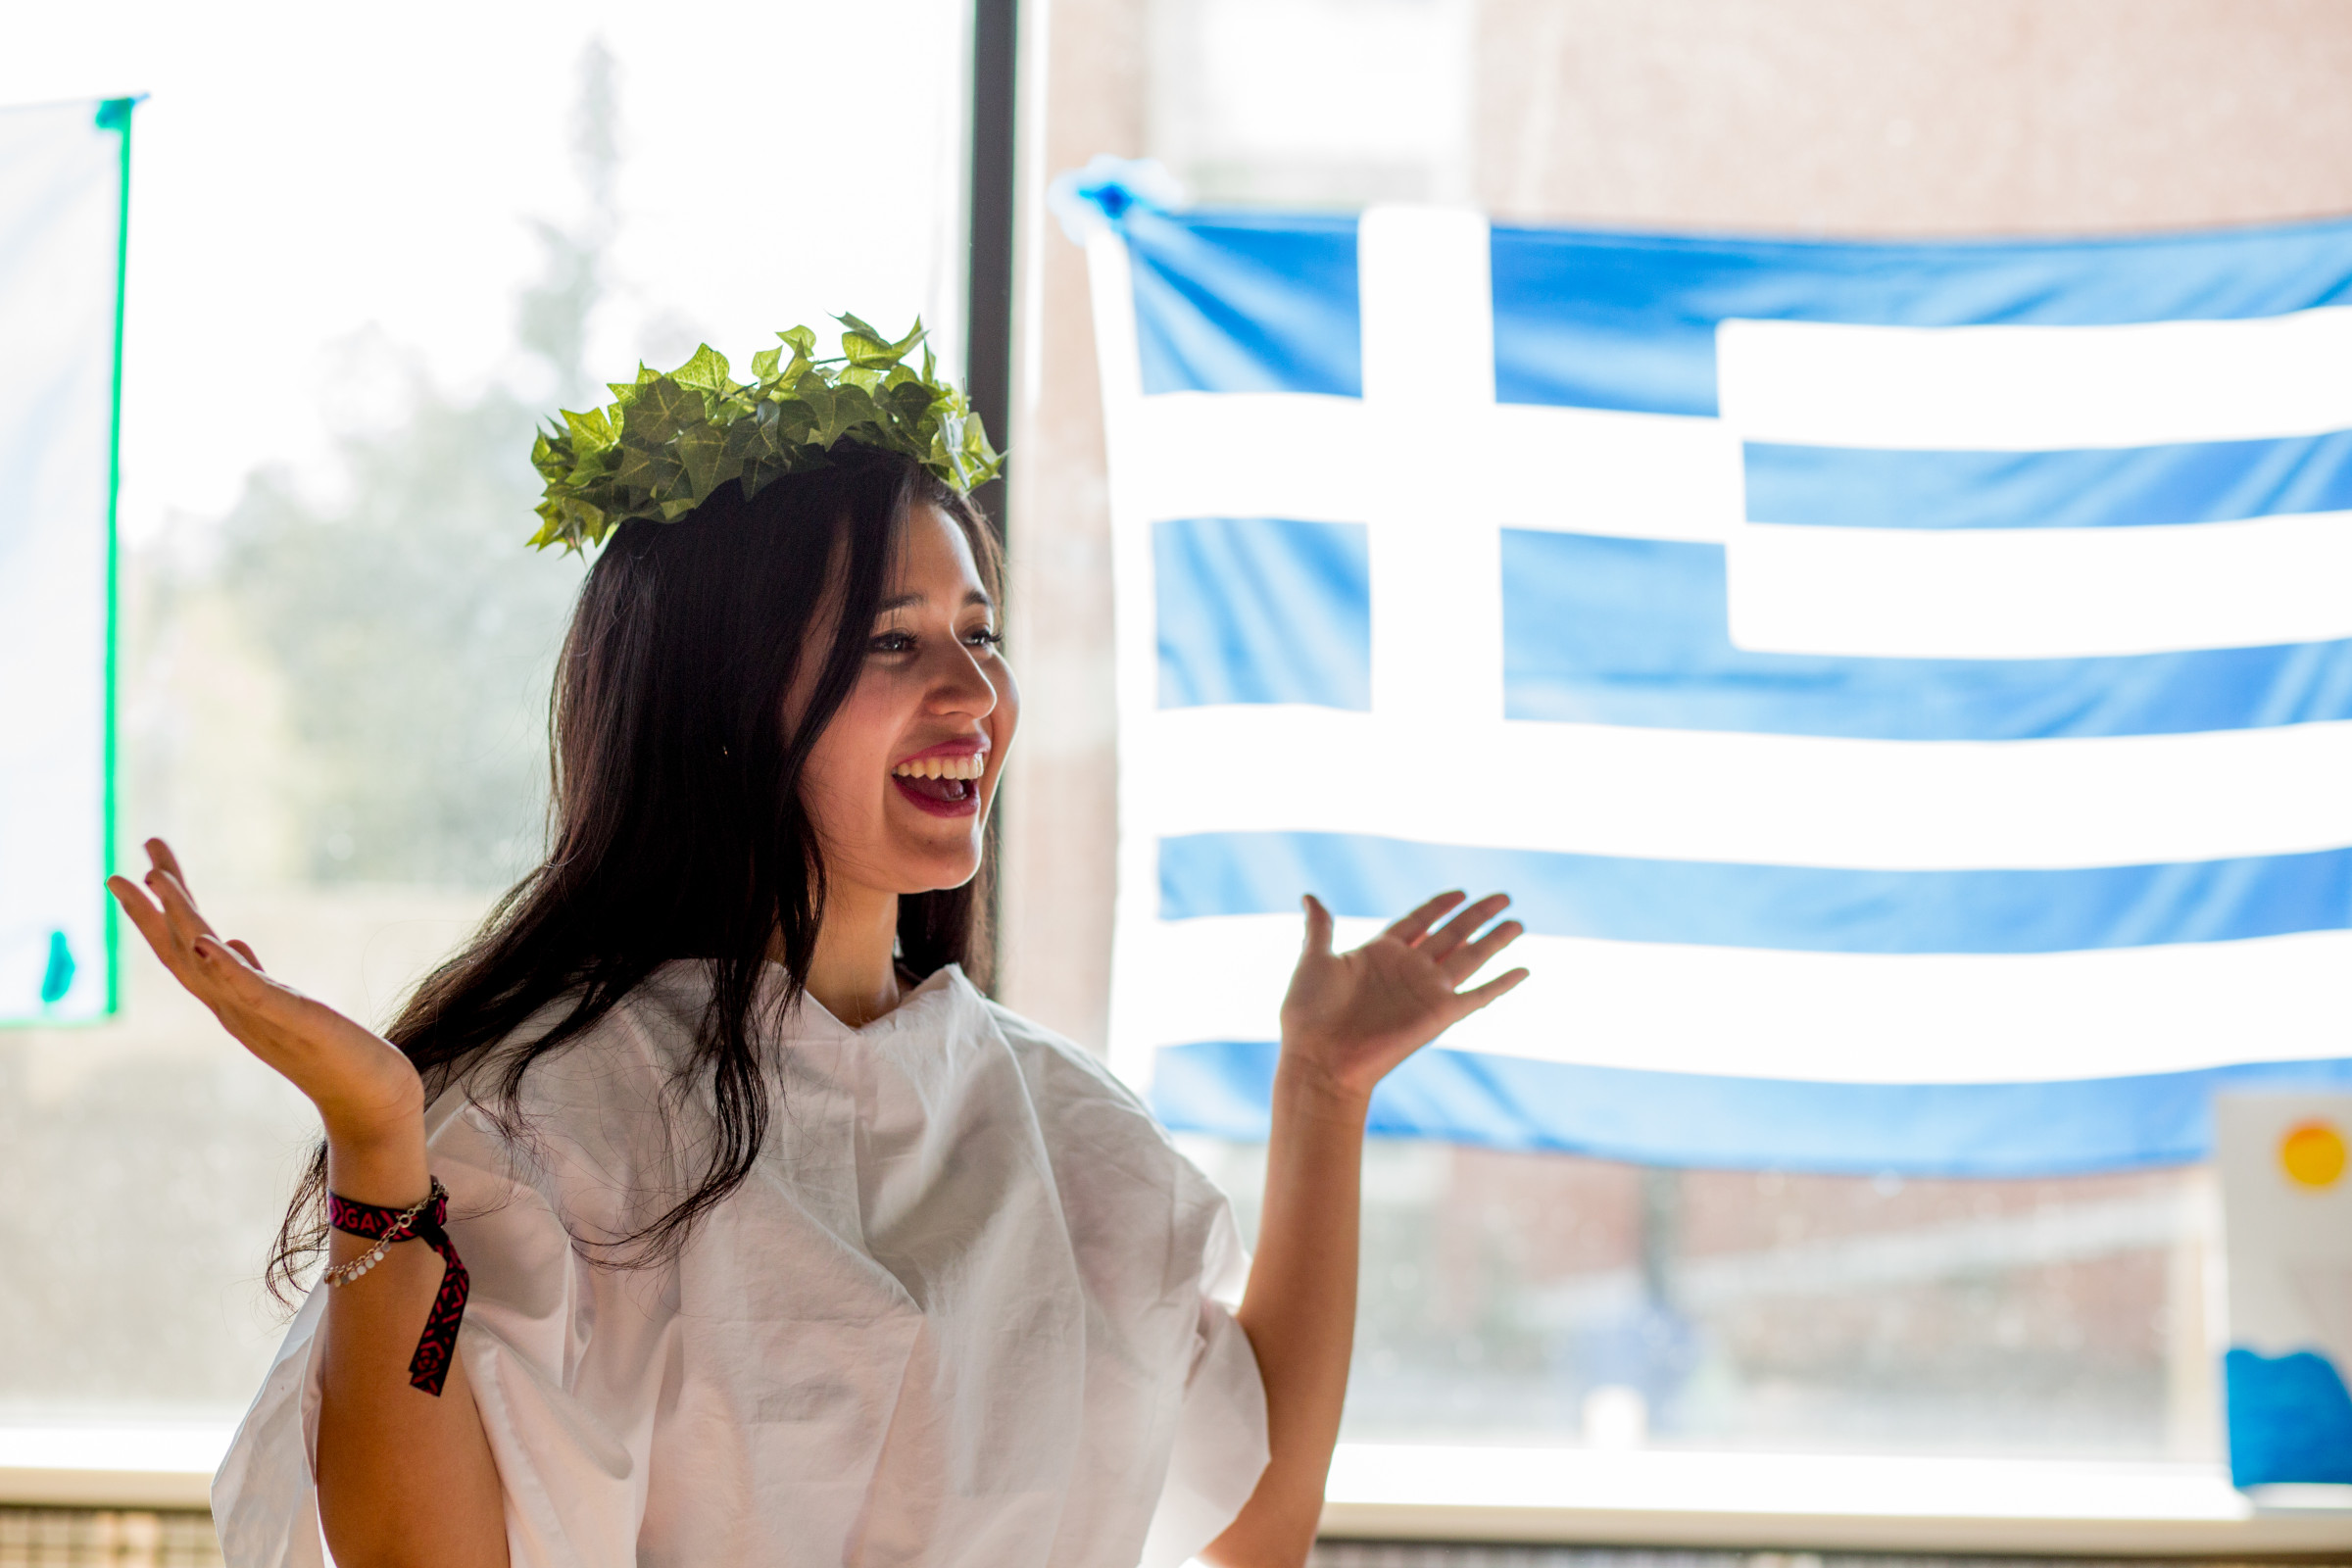 A photo of a student dressed in traditional Greek attire at international festival.